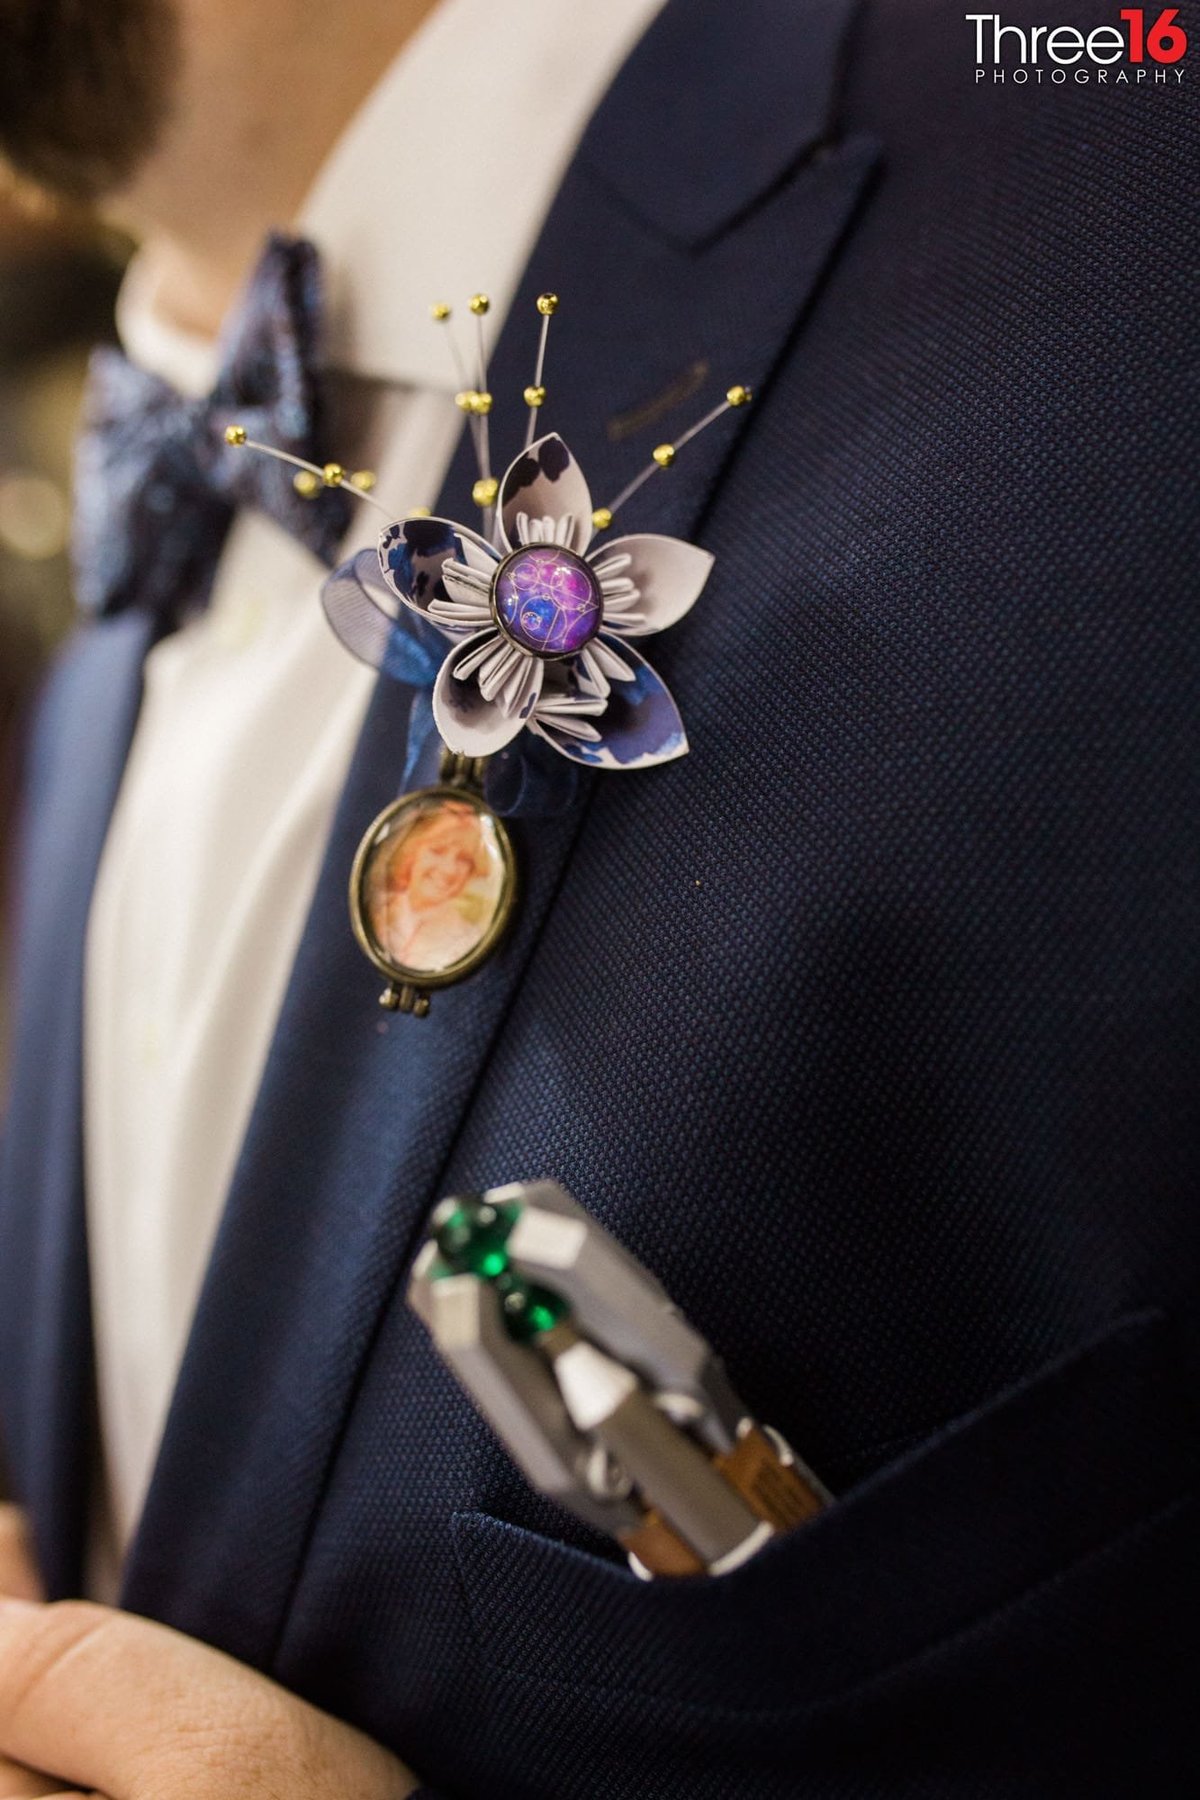 Groom wearing a truly unique boutonniere